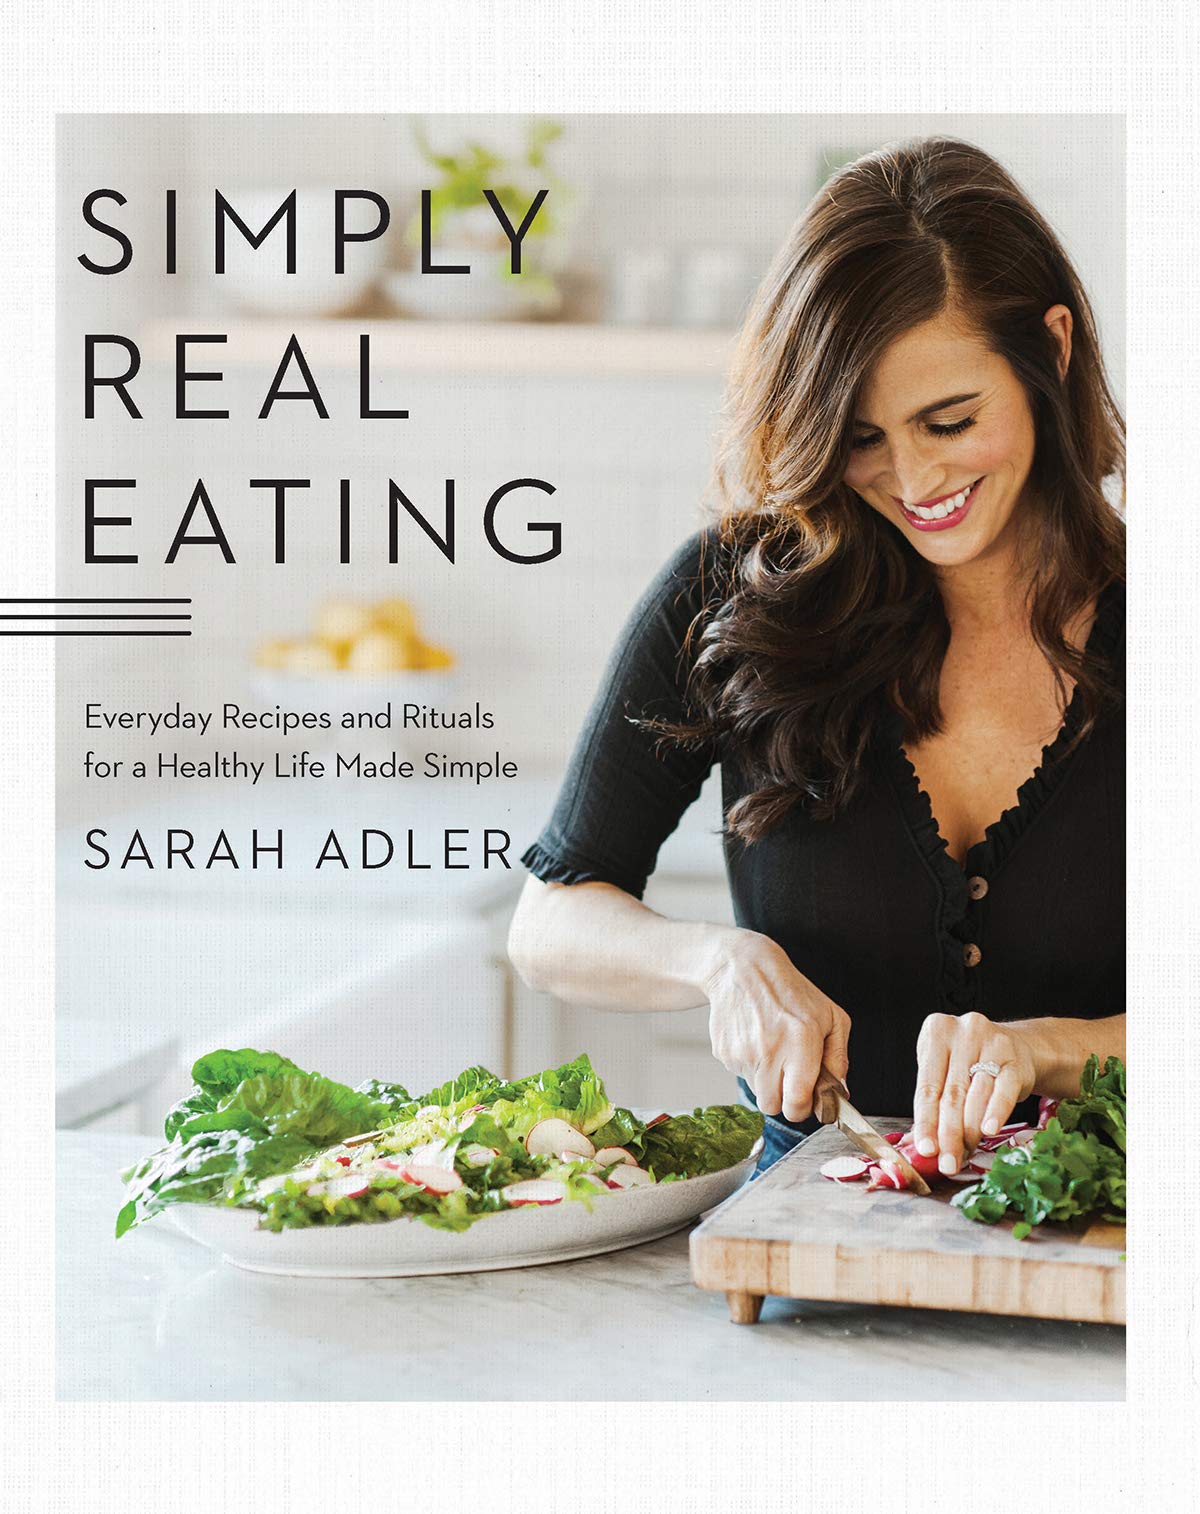 Simply Real Eating: Everyday Recipes and Rituals for a Healthy Life Made Simple (Sarah Adler)